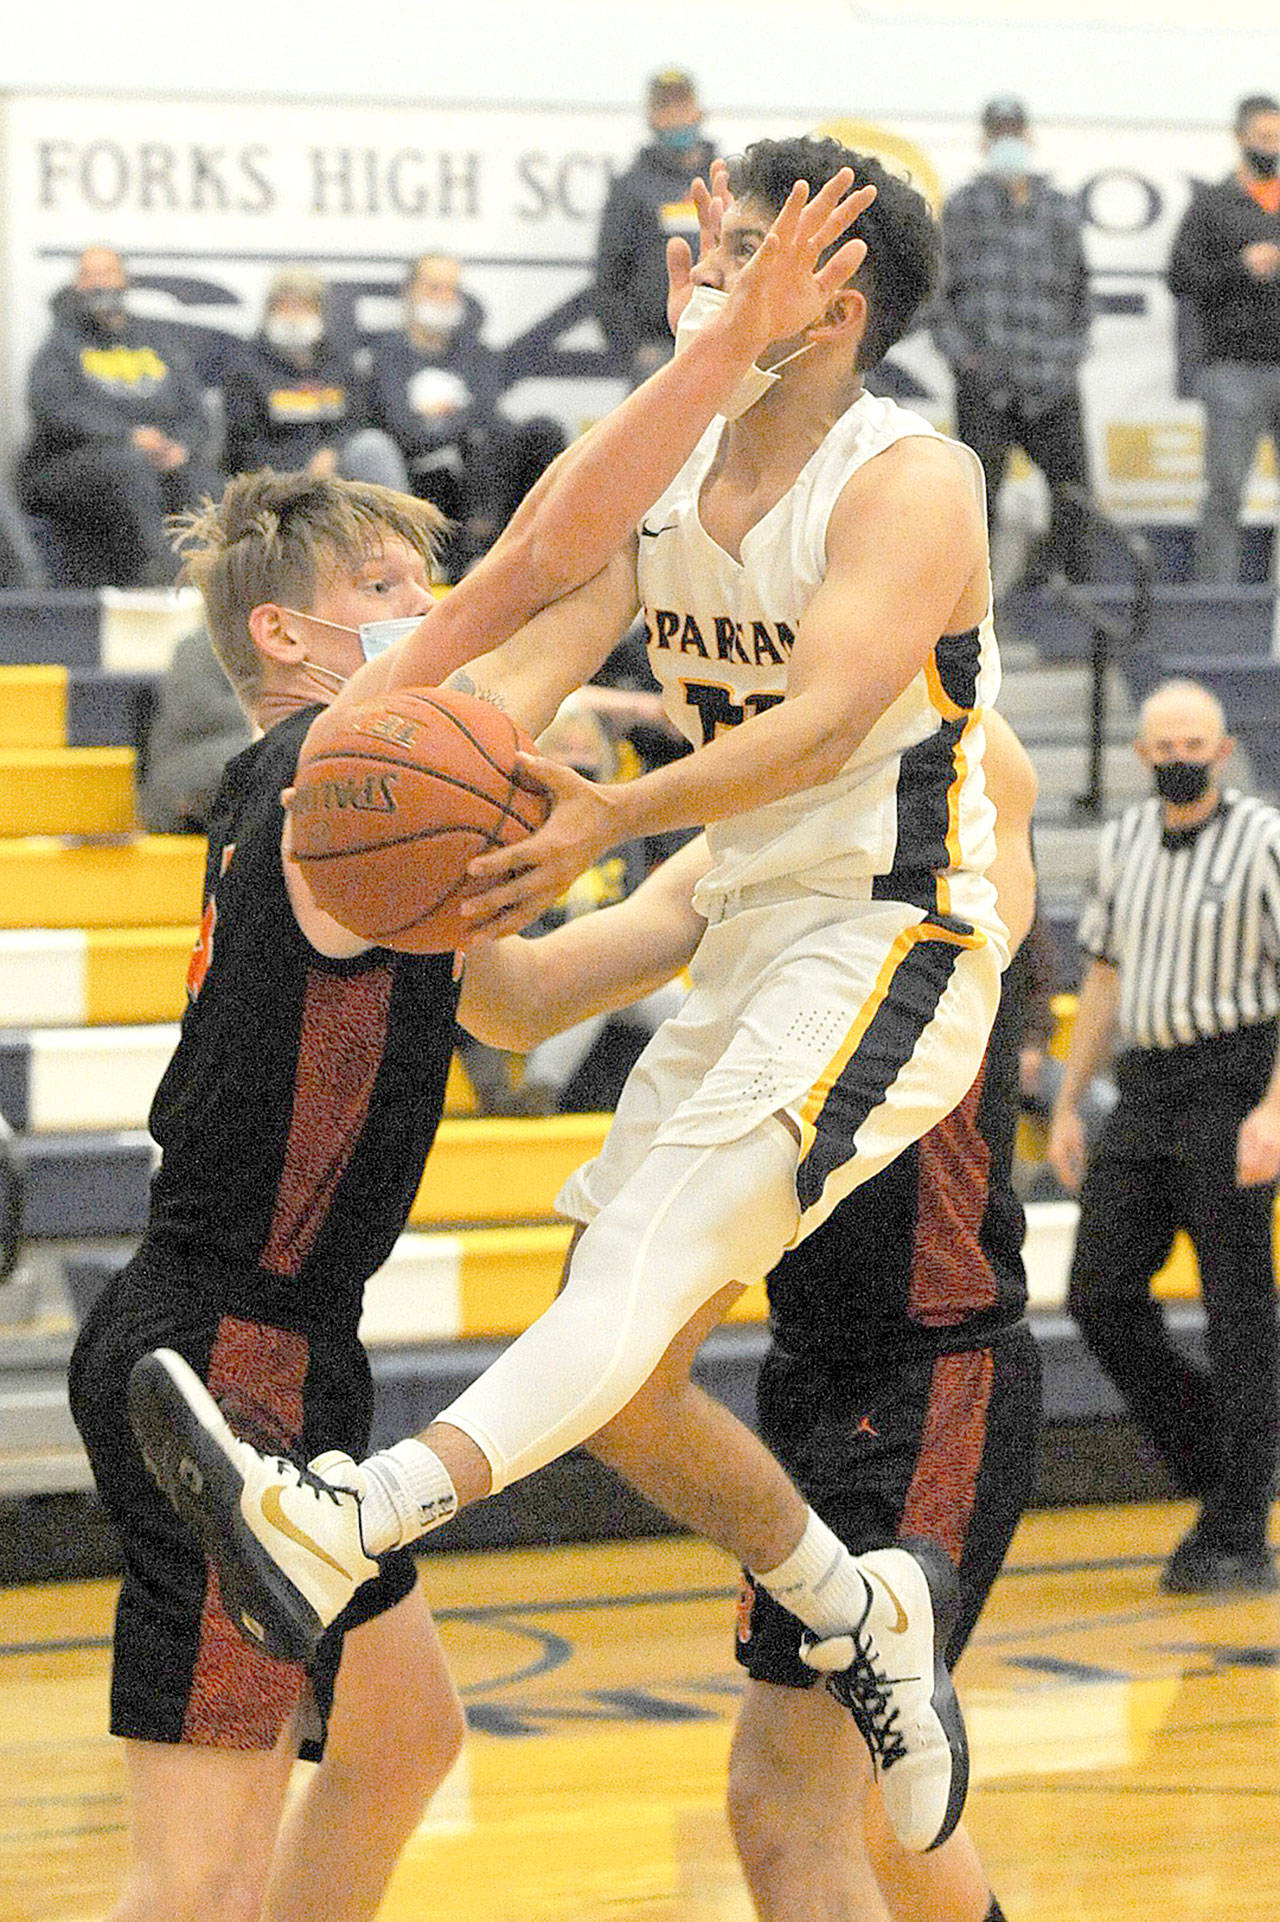 (Lonnie Archibald/for Peninsula Daily News) Forks Tony Hernandez-Flores drives towards the basket past Rainier’s Logan Bowers during this district play-off Monday game in Forks. The Spartans lost 61-56 to the Mountaineers.